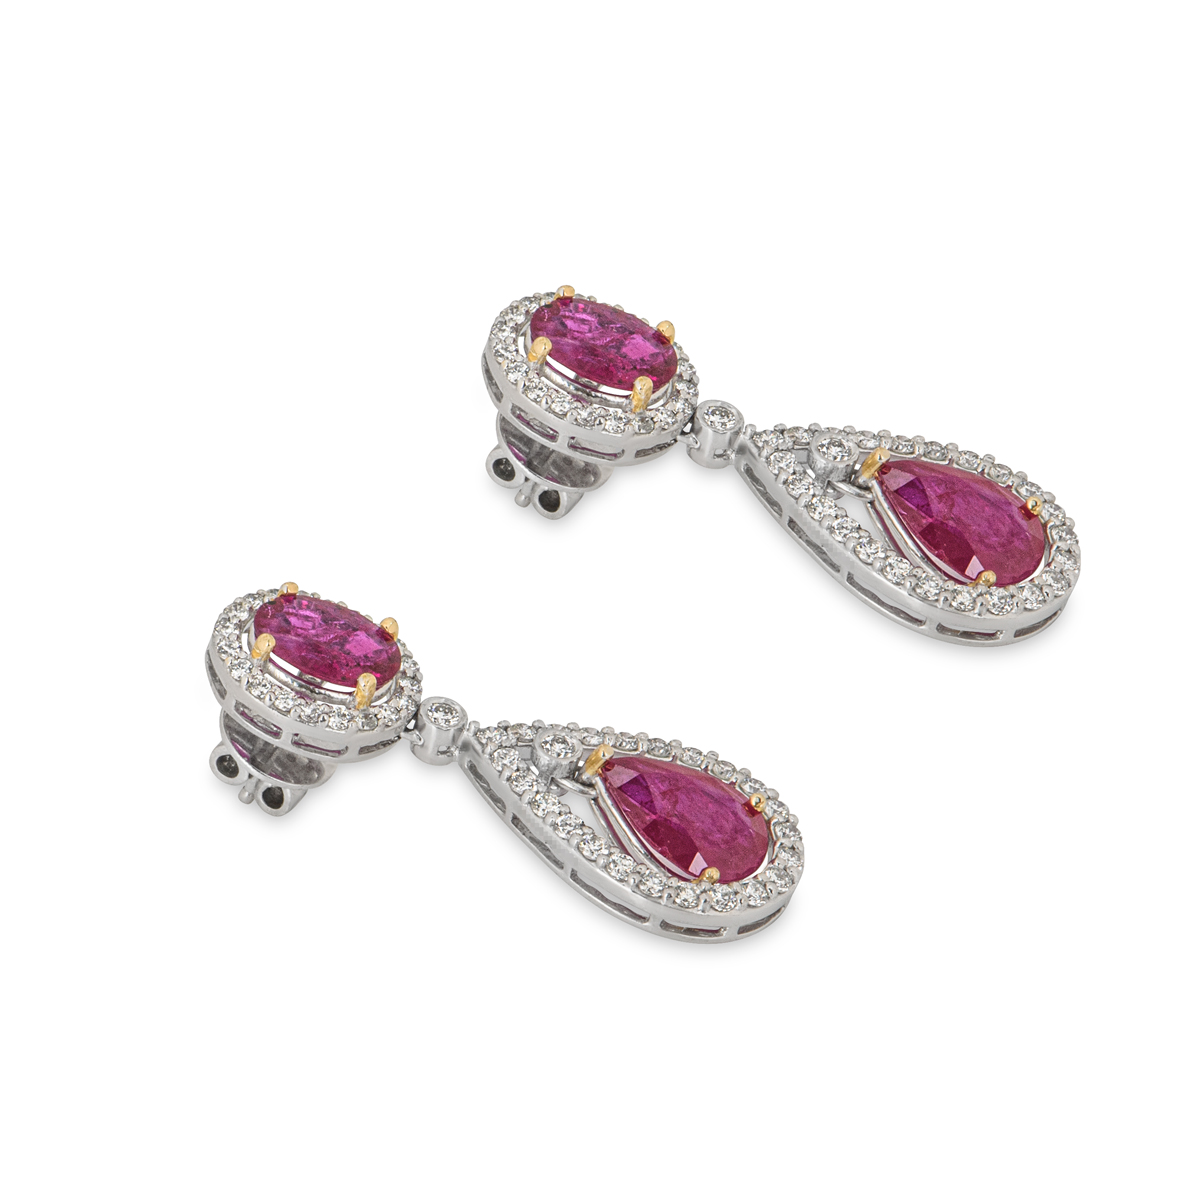 White Gold Ruby and Diamond Earrings 7.67ct